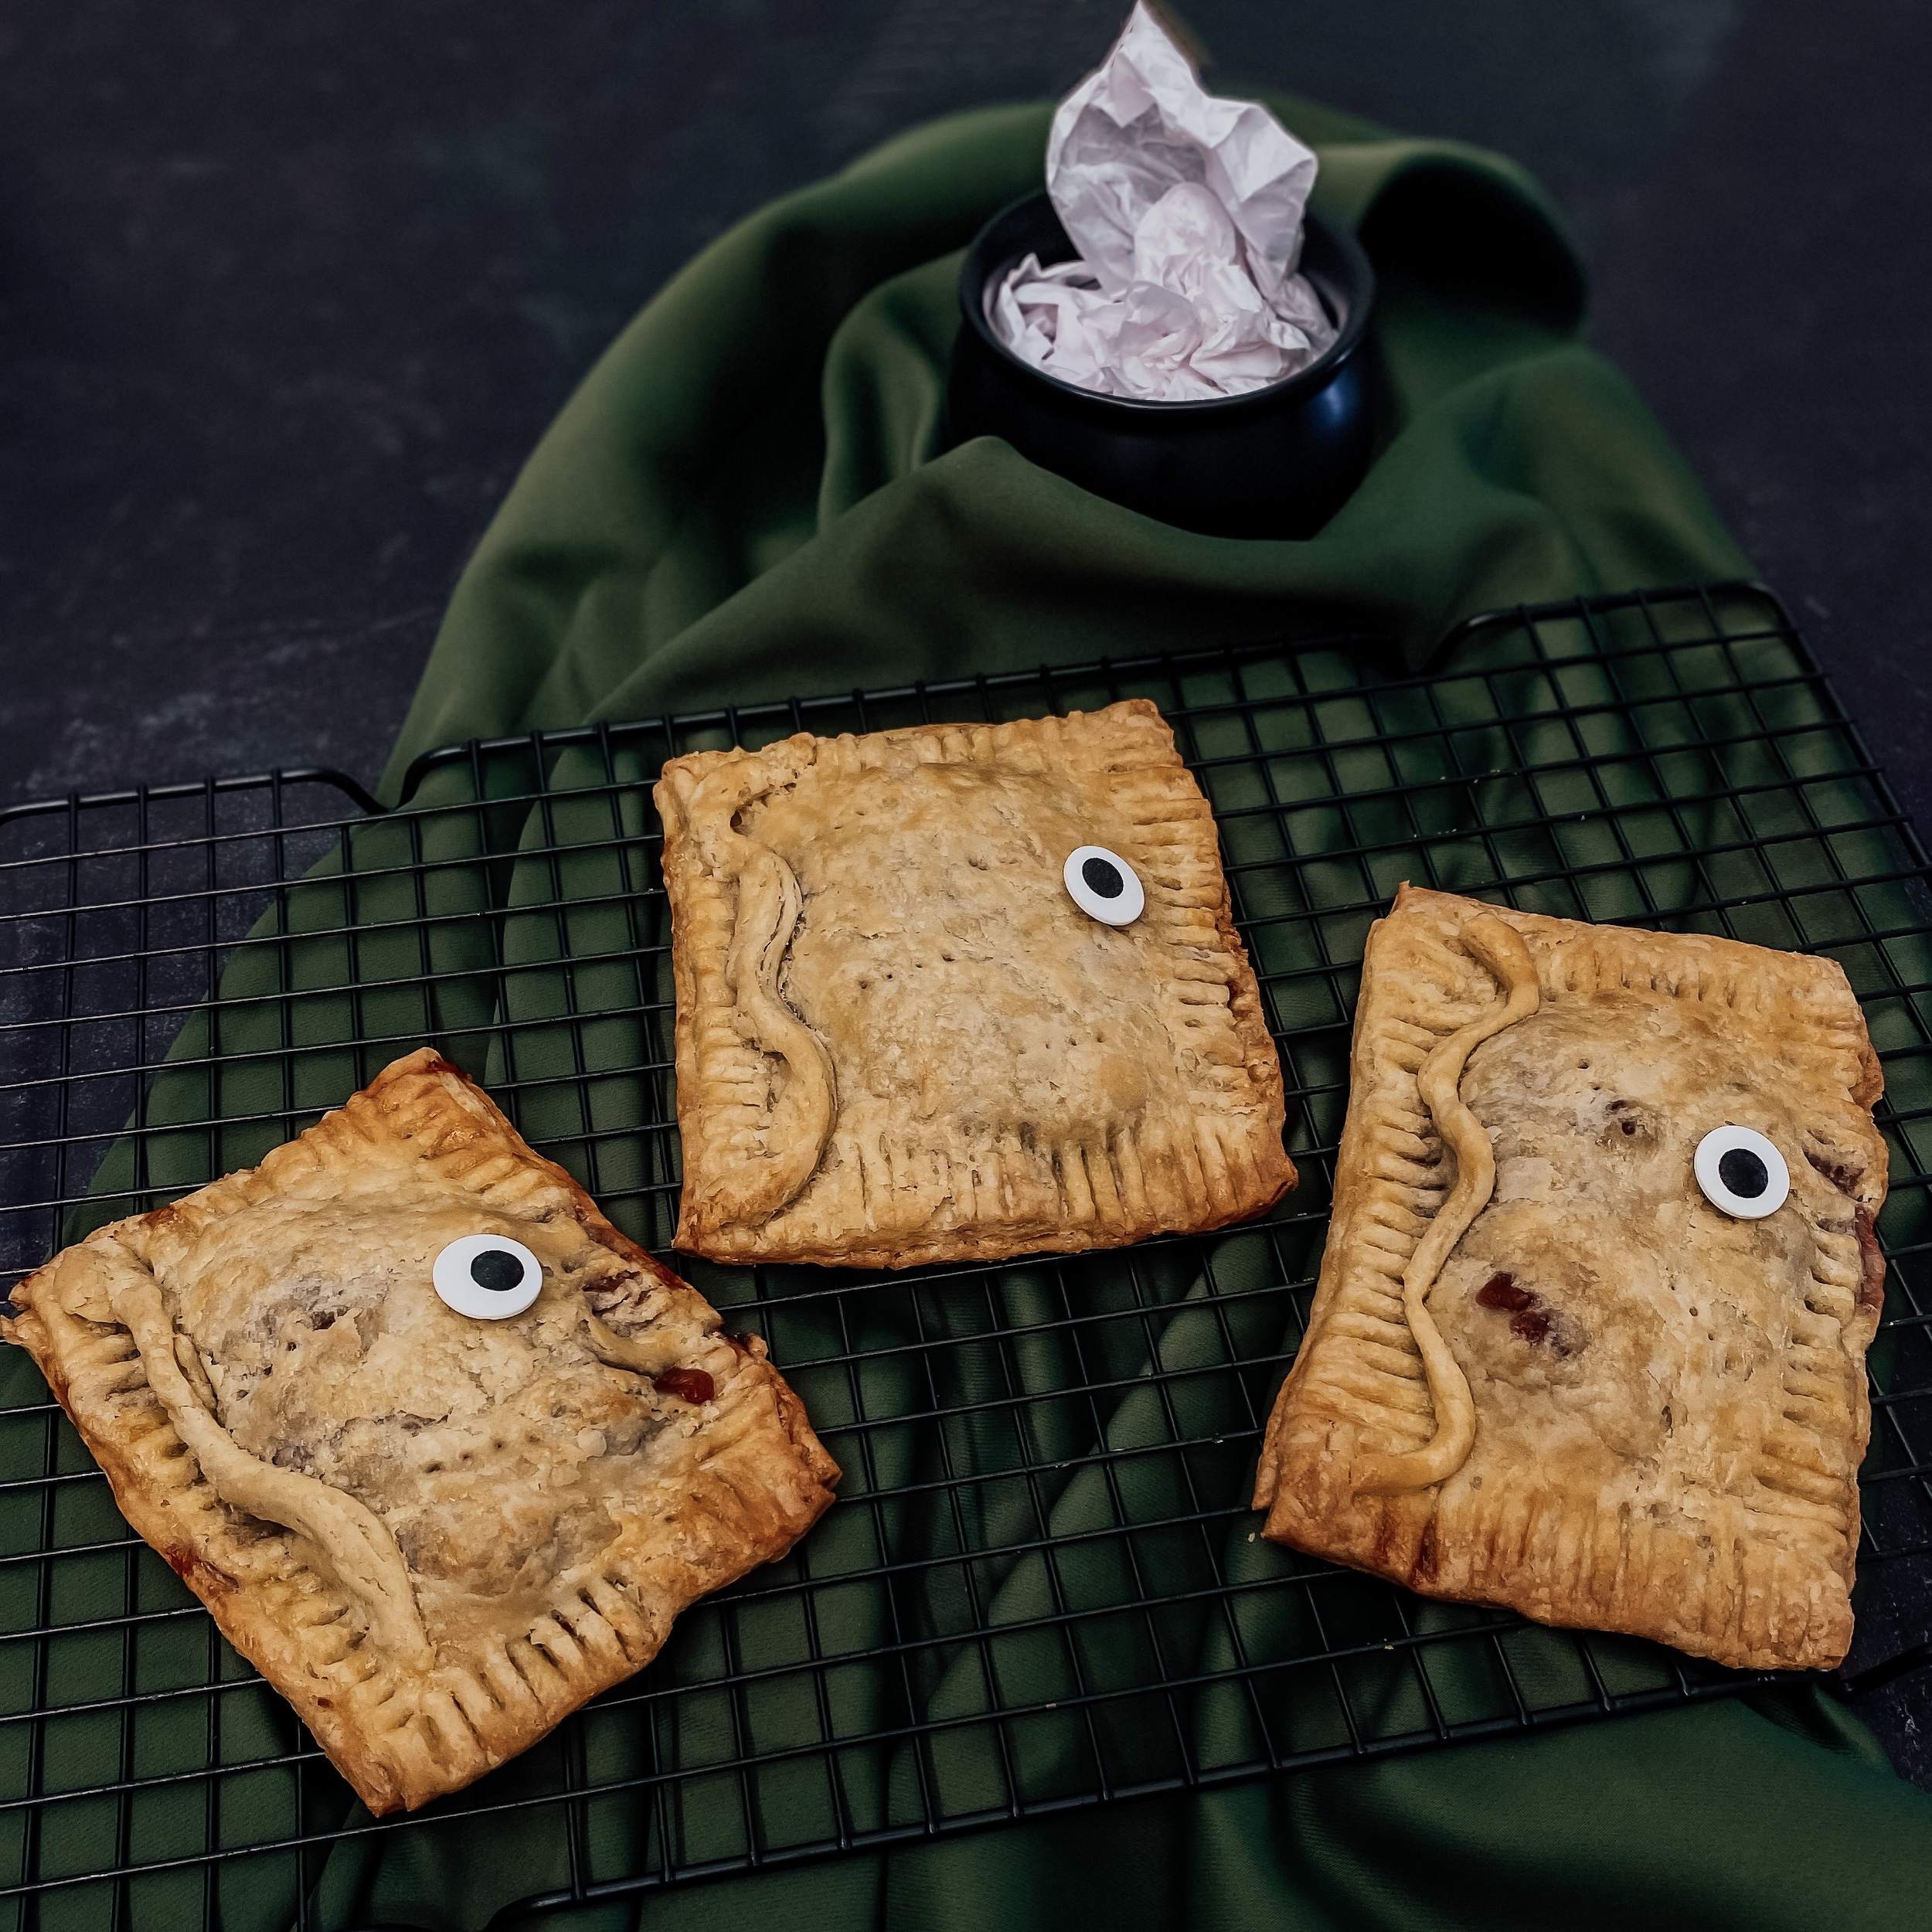 Winifred's Spellbook Hand Pies (three book shaped pies on a green background with a mini cauldron)